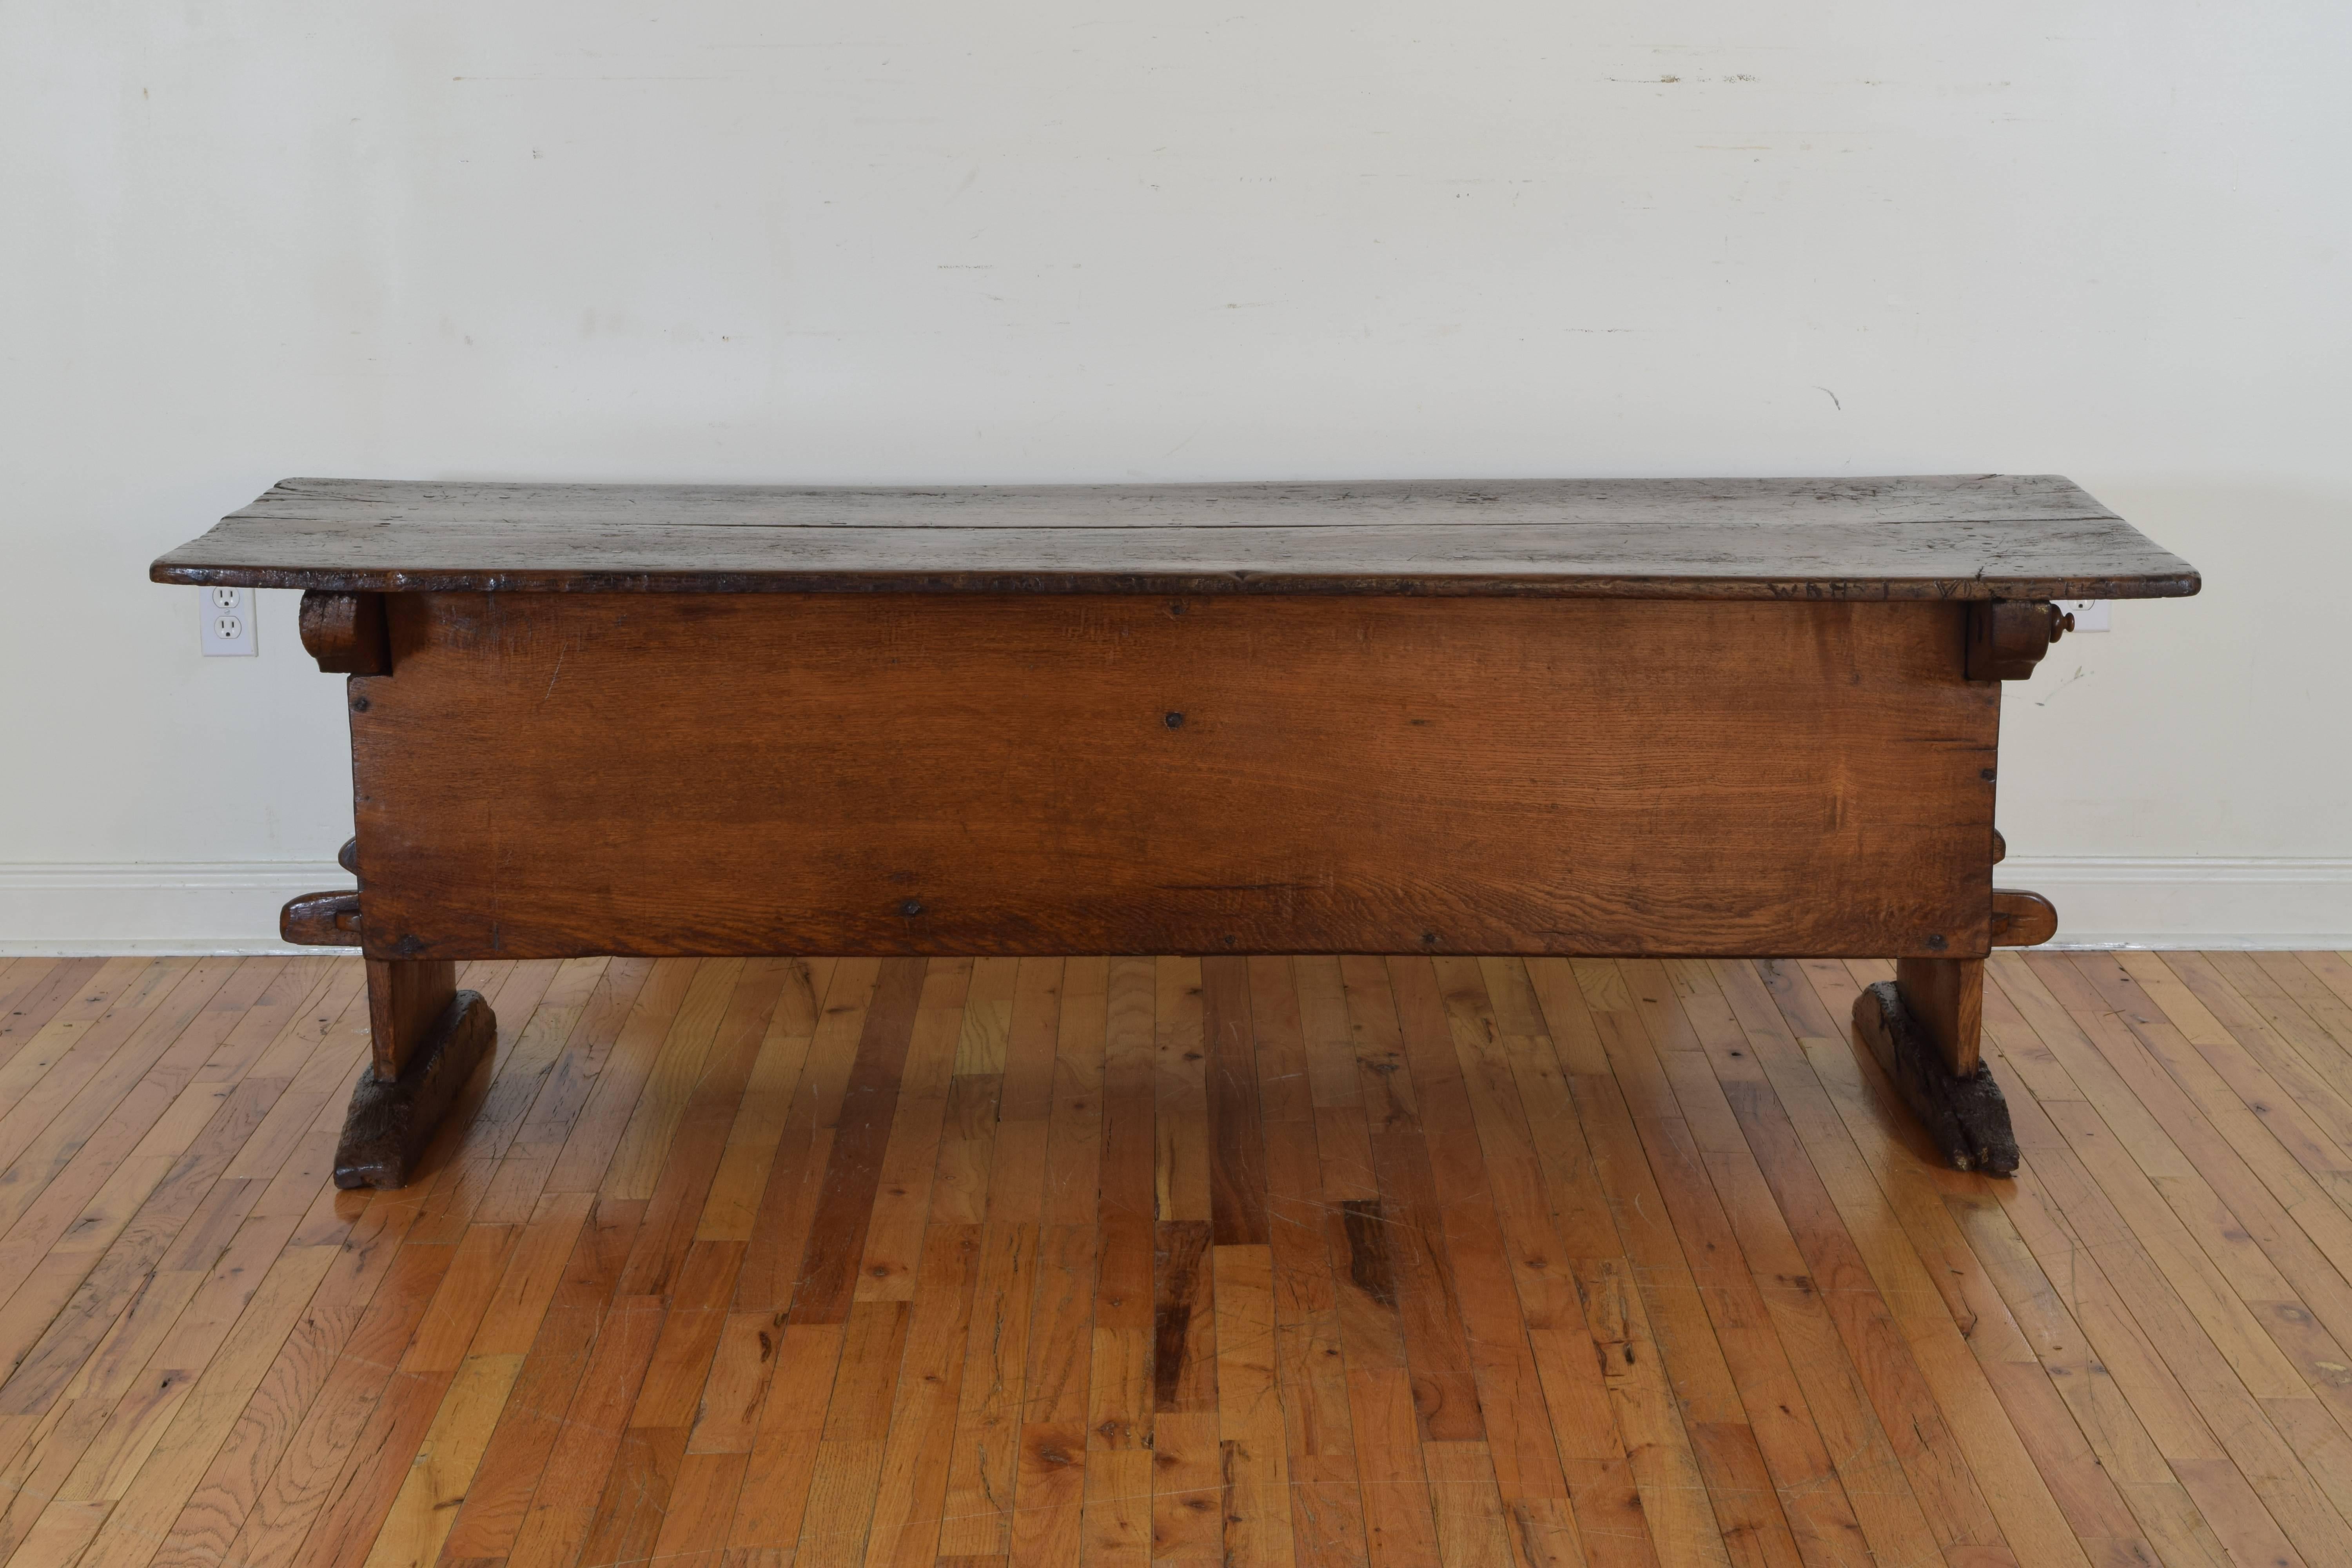 Early 18th Century Unusual Swiss Oak Rustic Table with Hinged Doors, 17th-18th Century